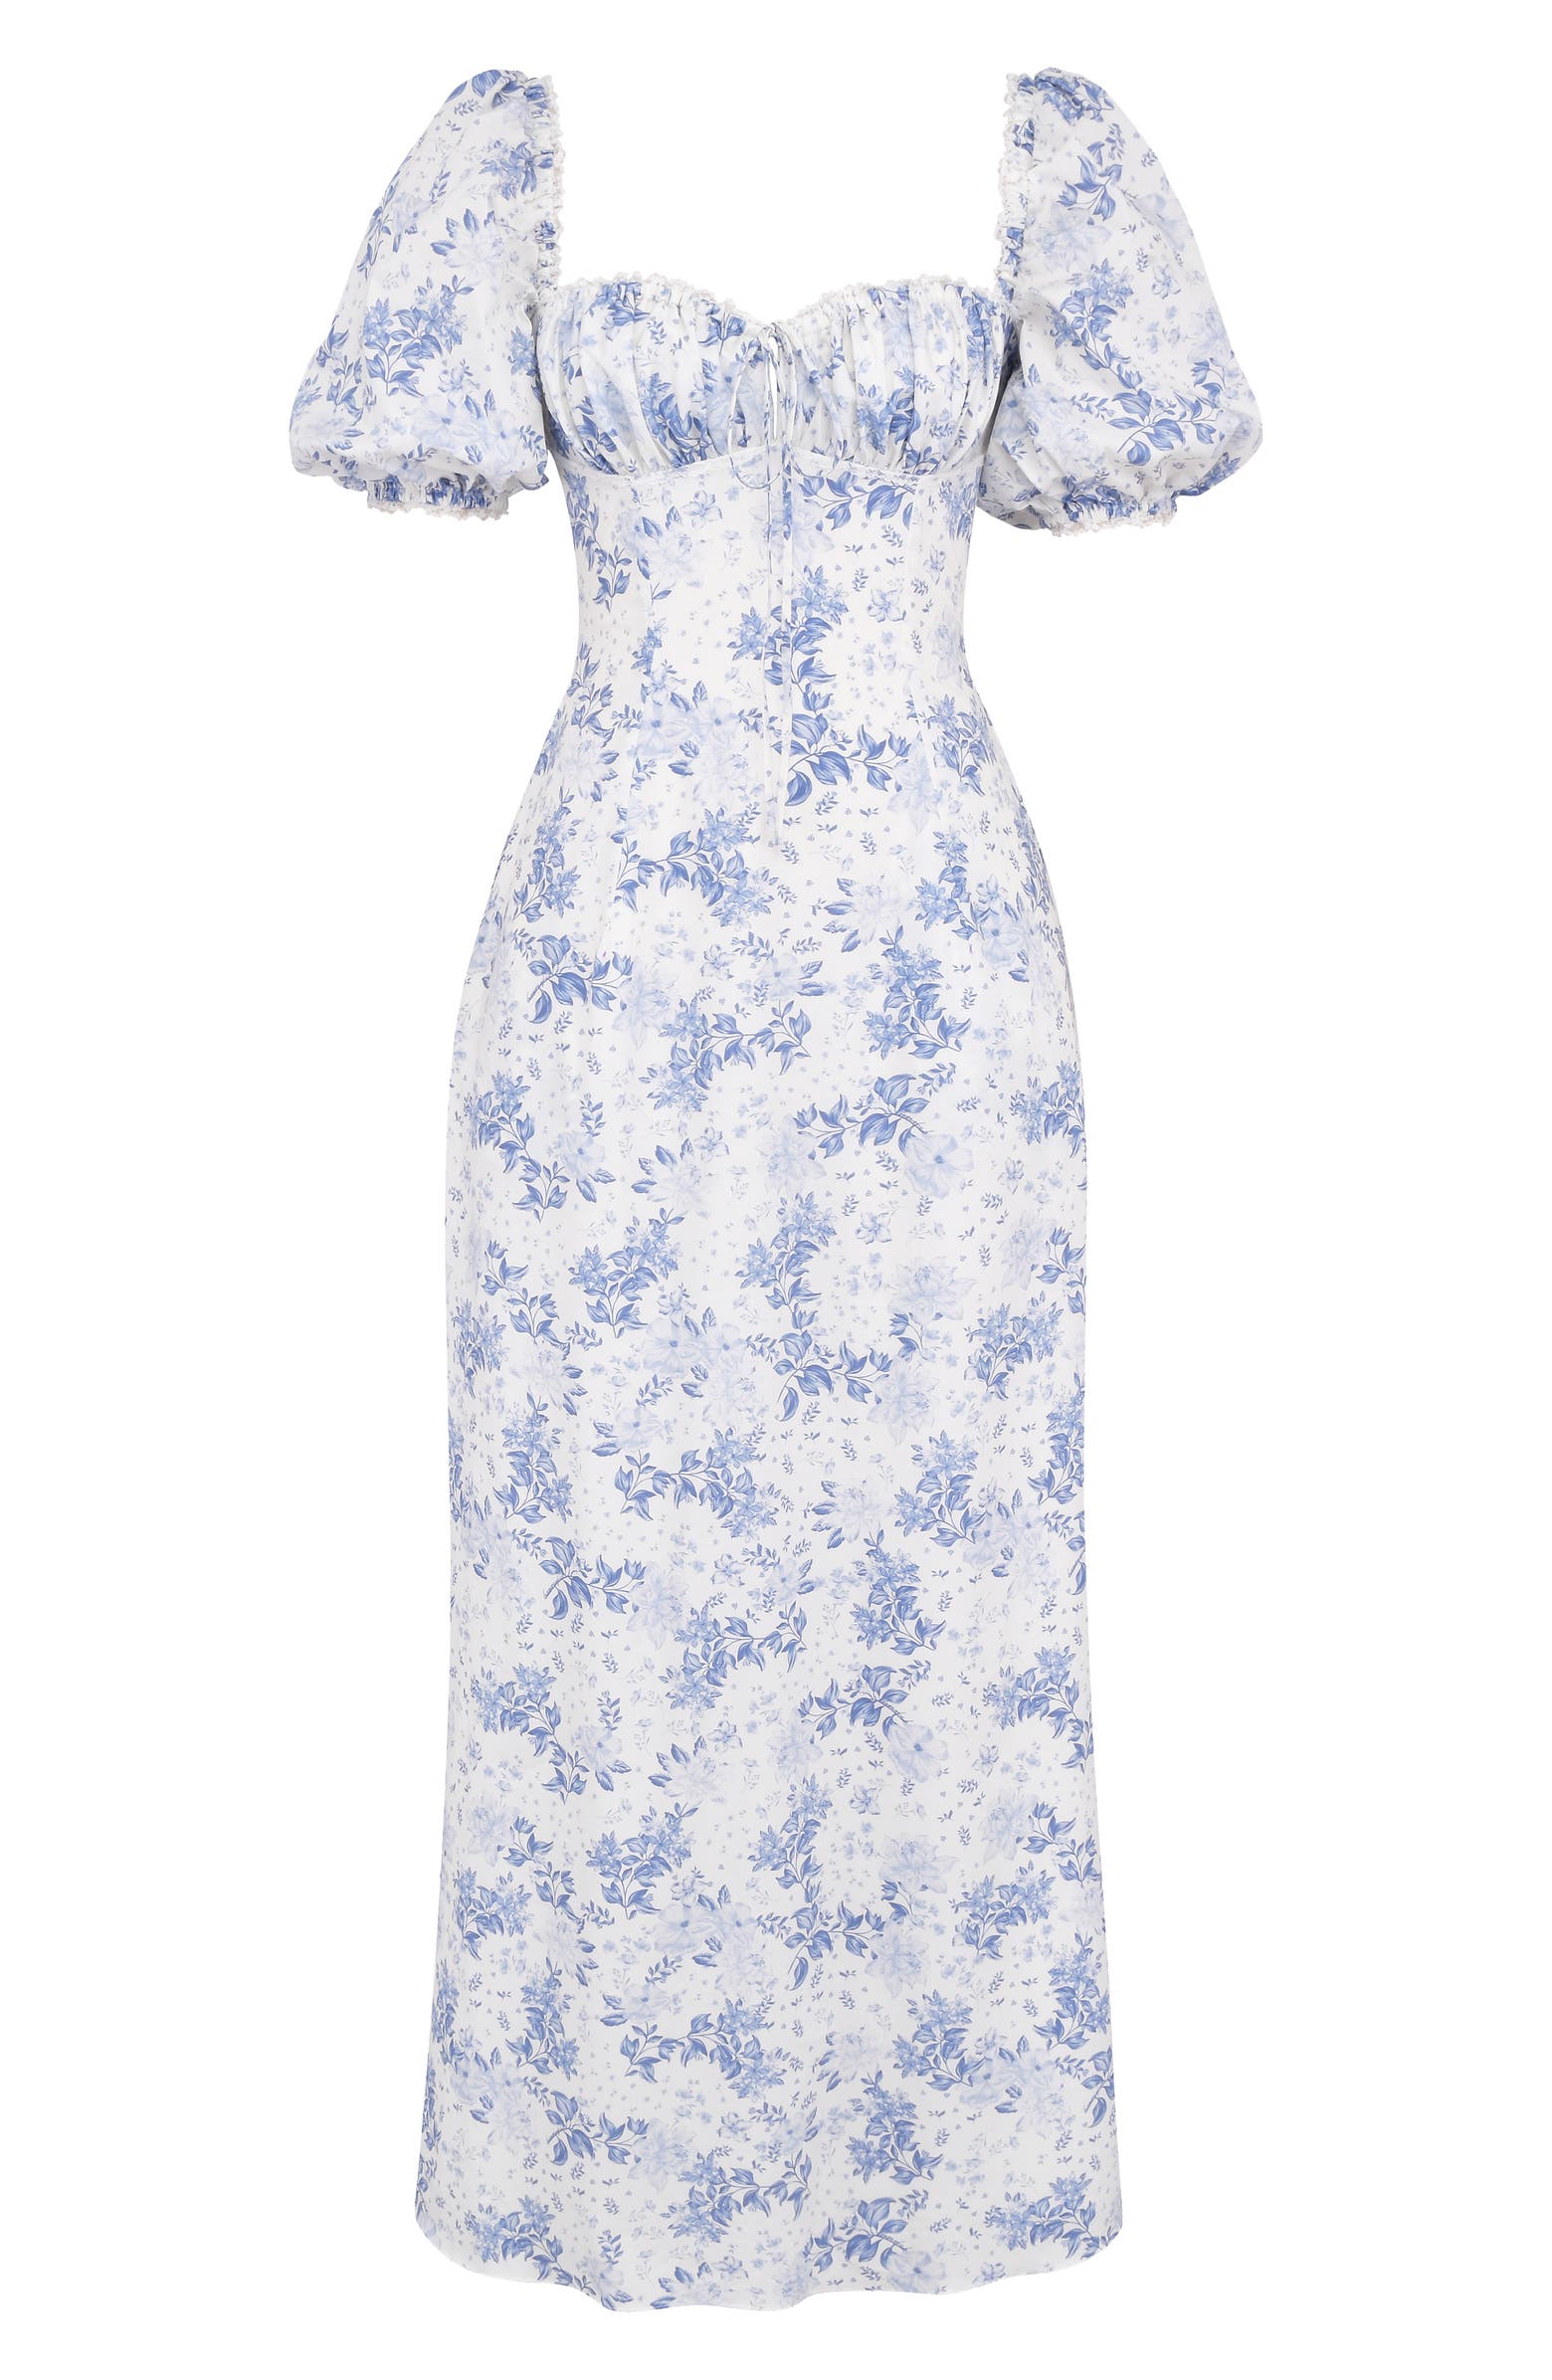 HOUSE OF CB Felizia Floral Puff Sleeve Maxi Dress | Nordstrom